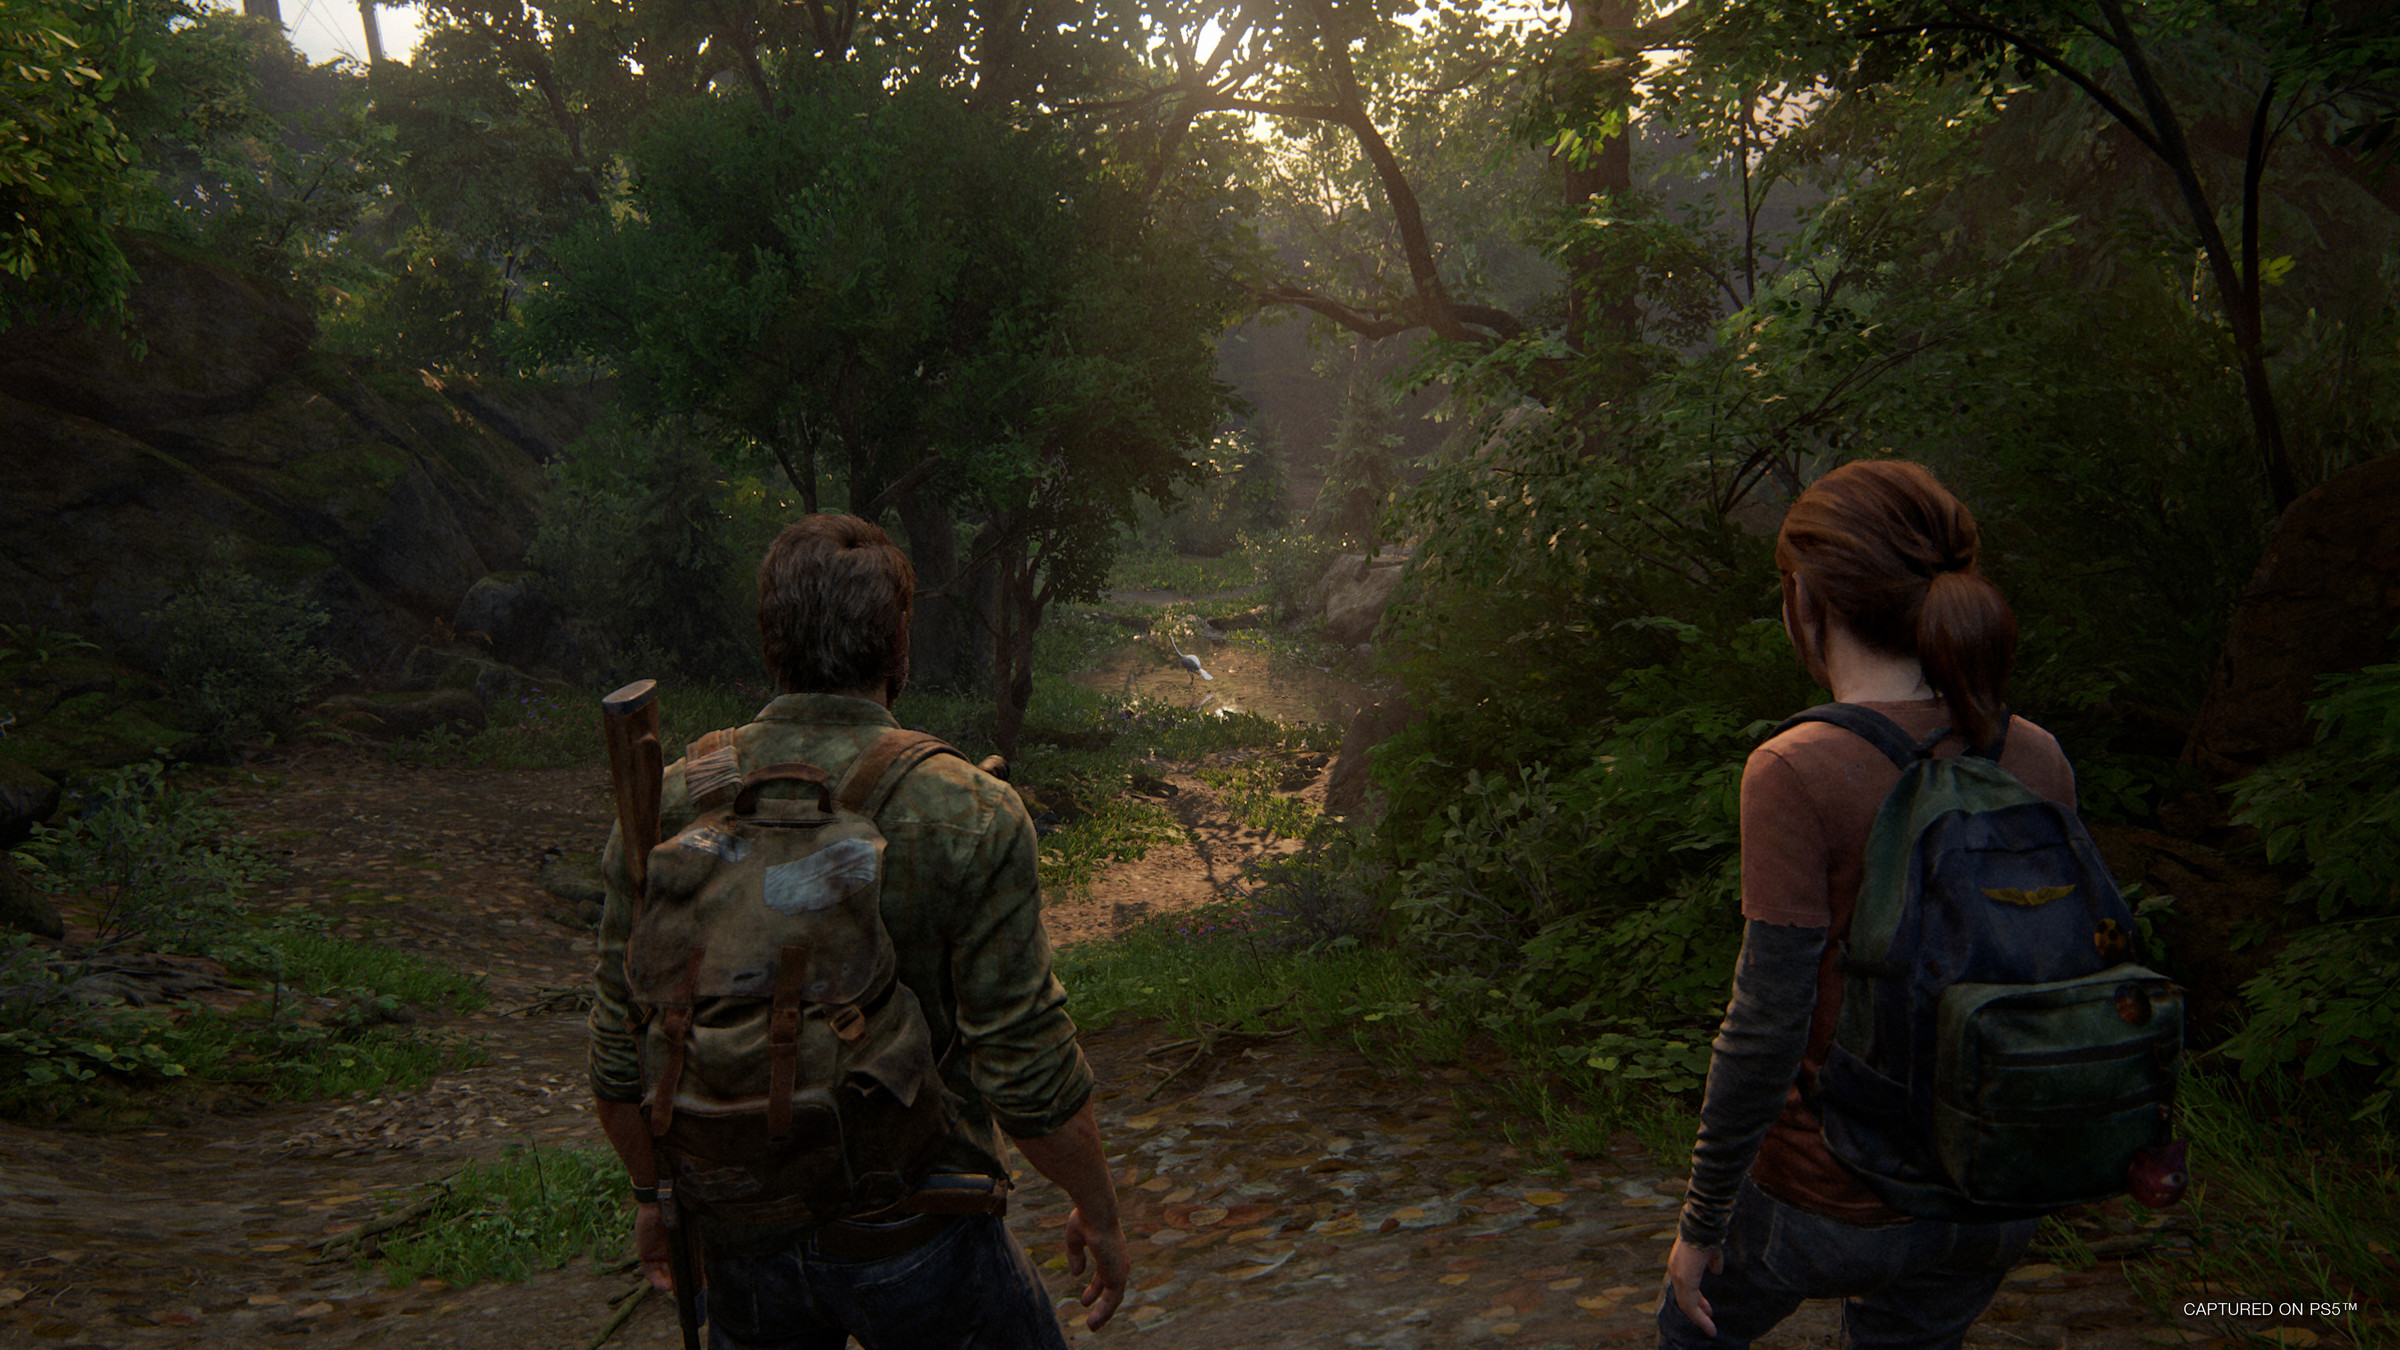 Two people with their backs to us are walking along a forest path.